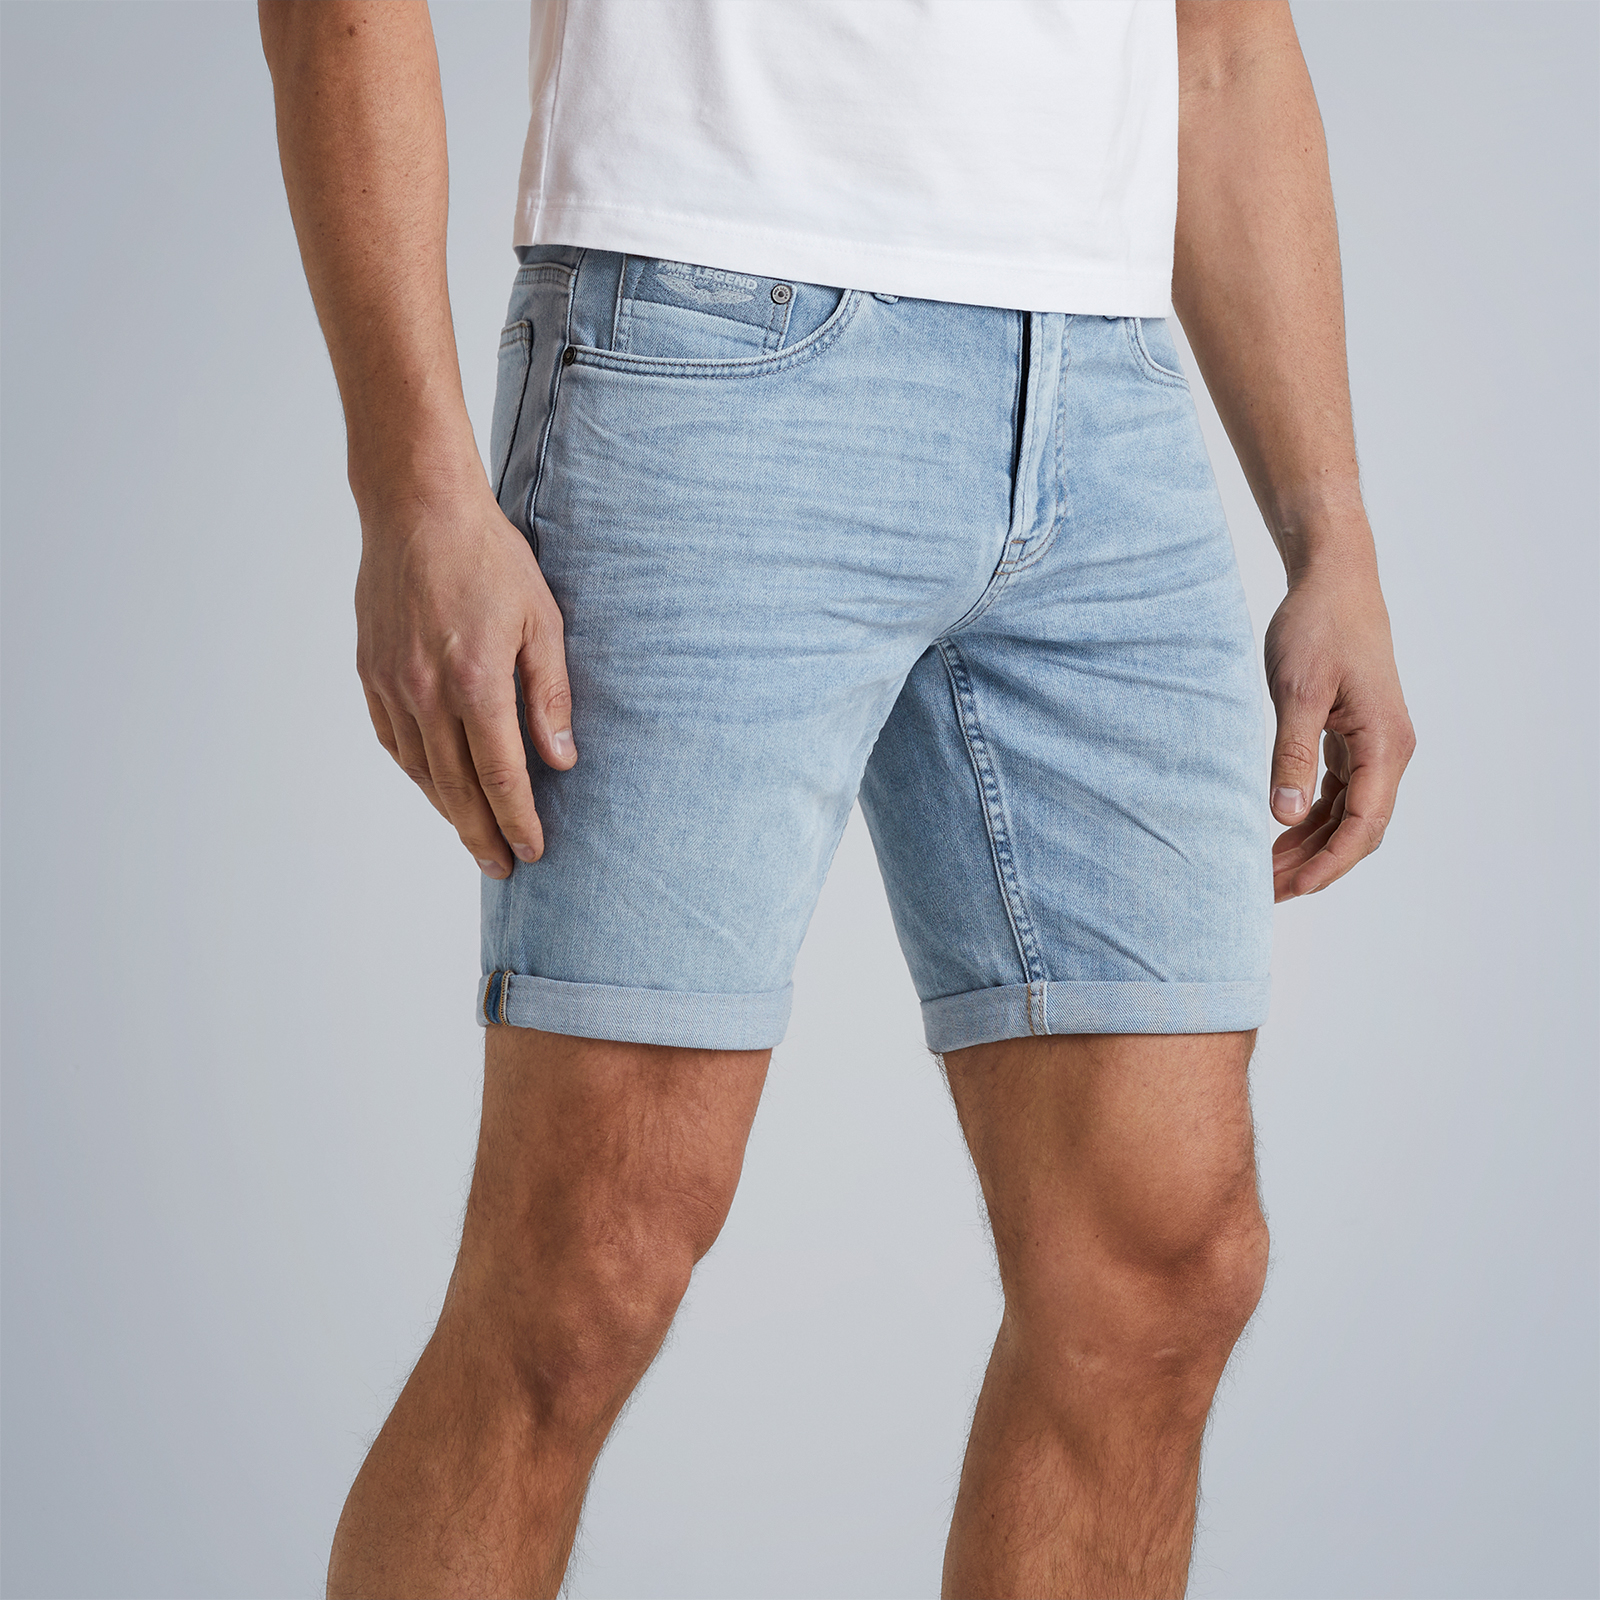 | and LEGEND returns | PME shipping Airgen Short Free